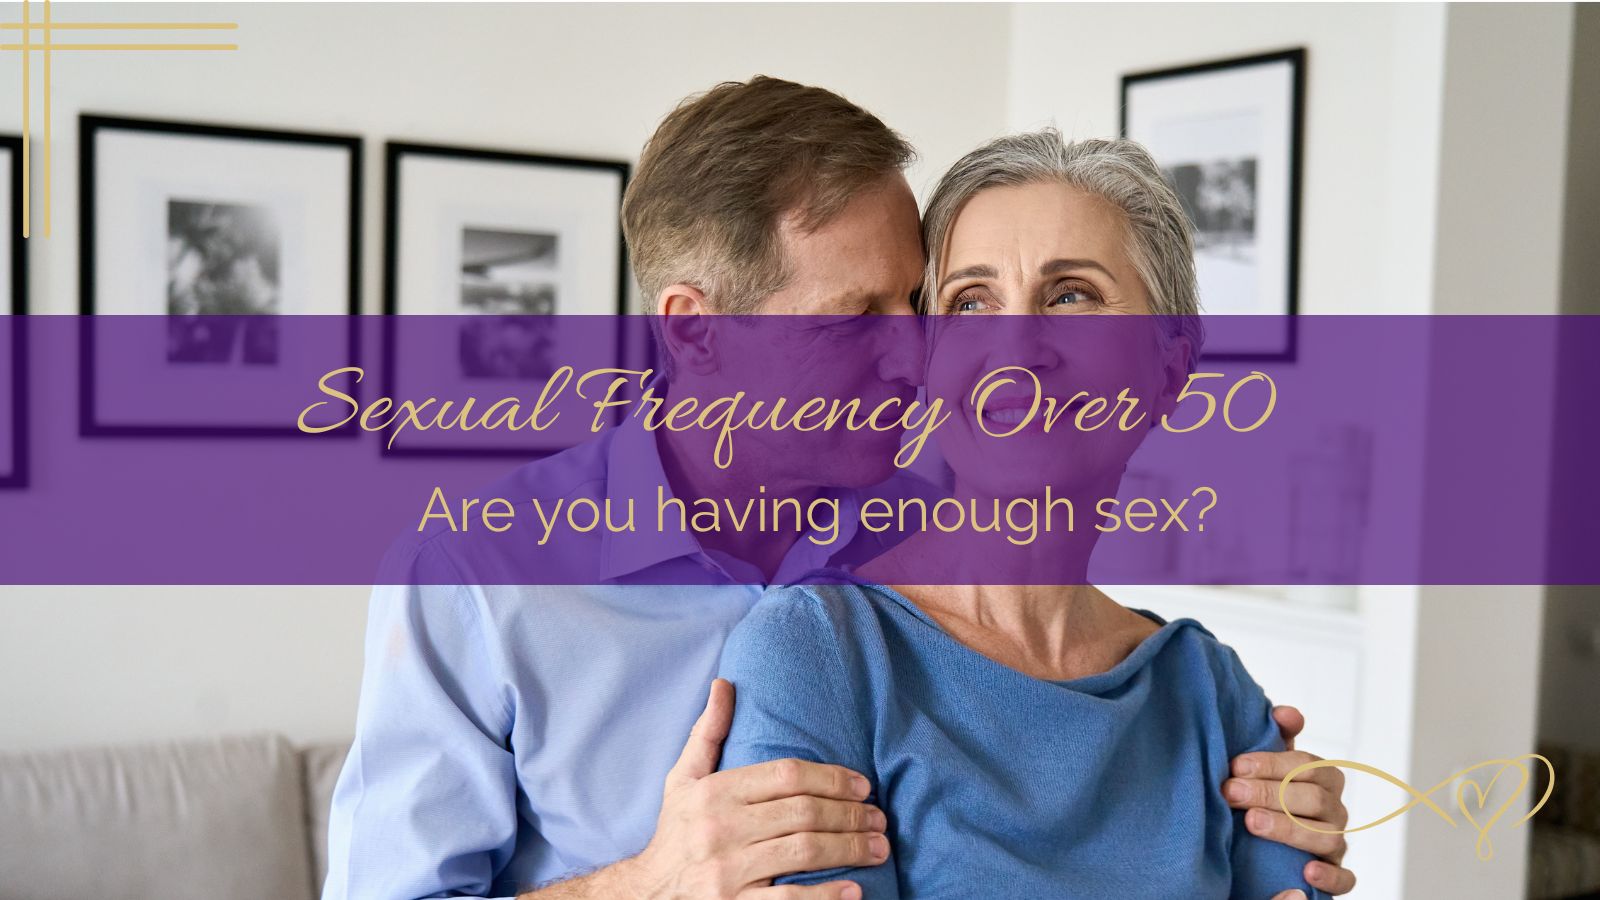 Sexual frequency